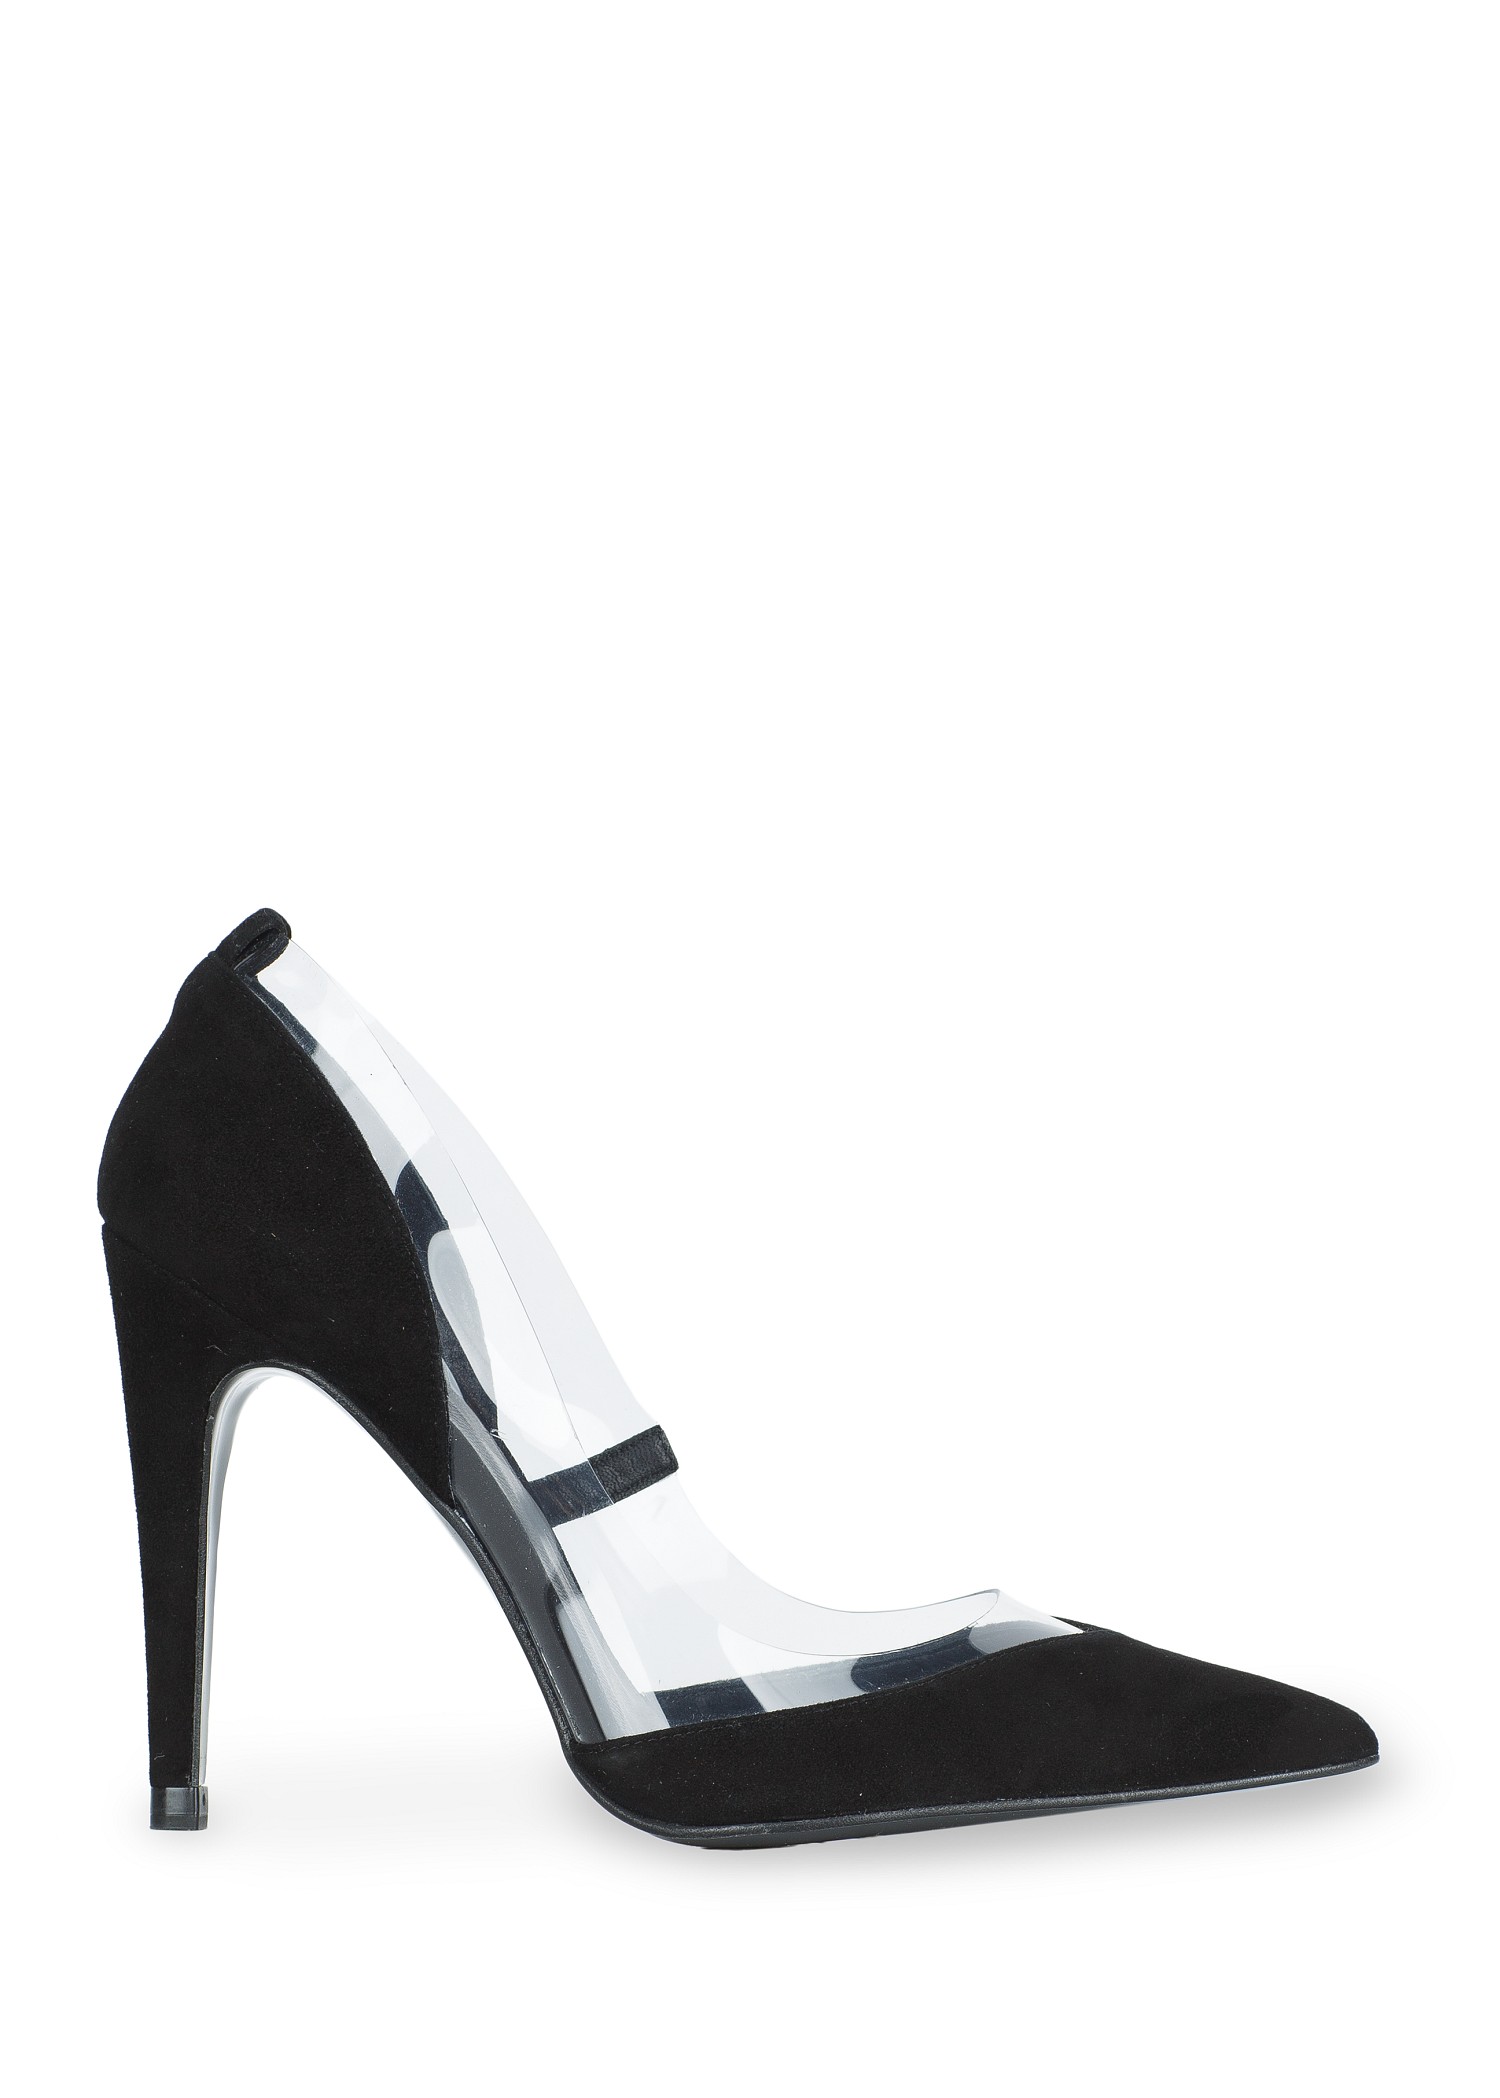 Lyst - Mango Suede and Vinyl Stiletto Shoes in Black